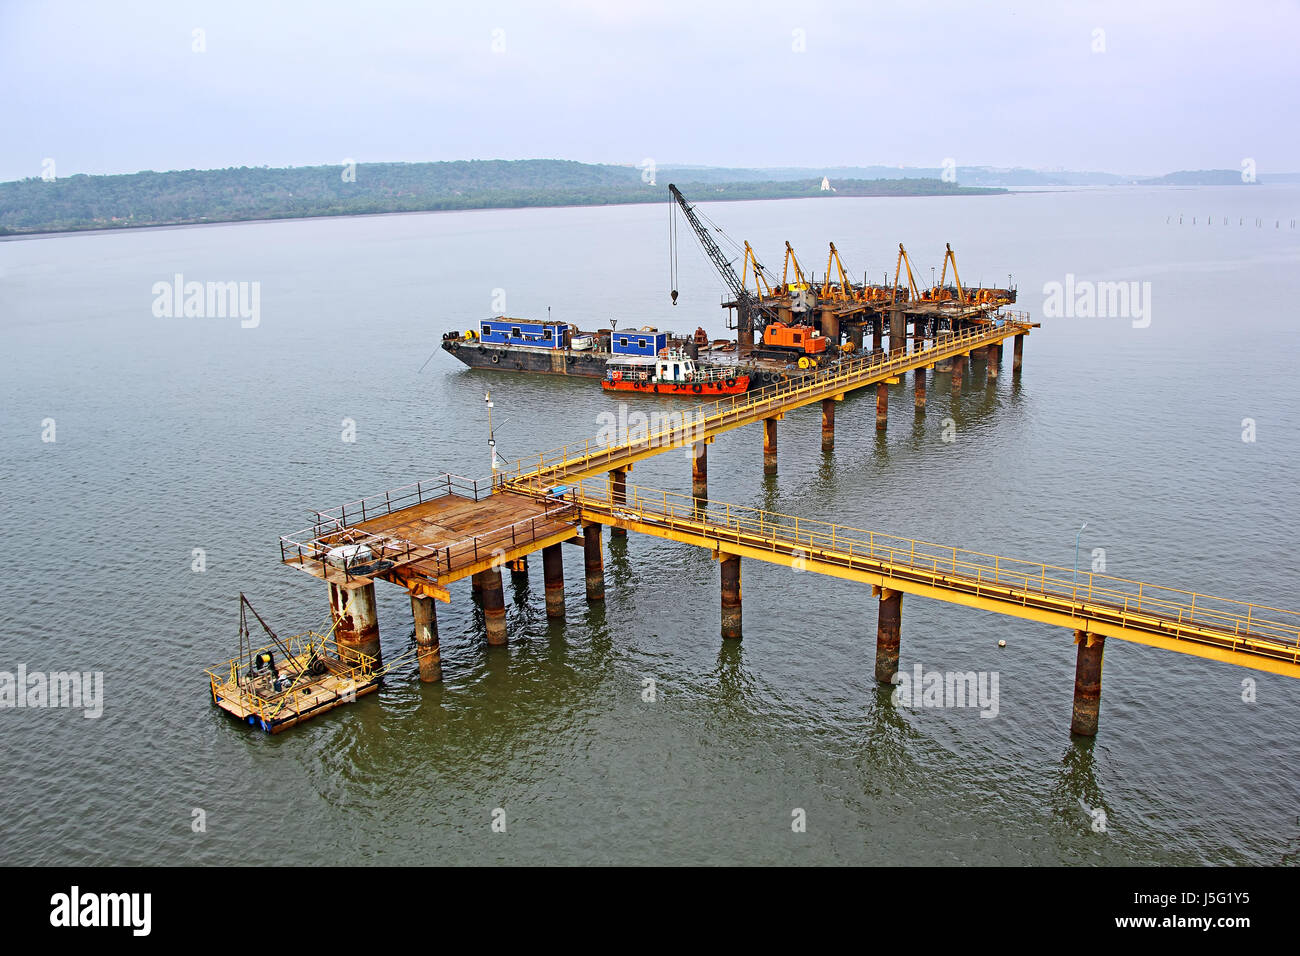 Aerial view of foundation work of marine project in progress in Zuari River in Goa, India Stock Photo